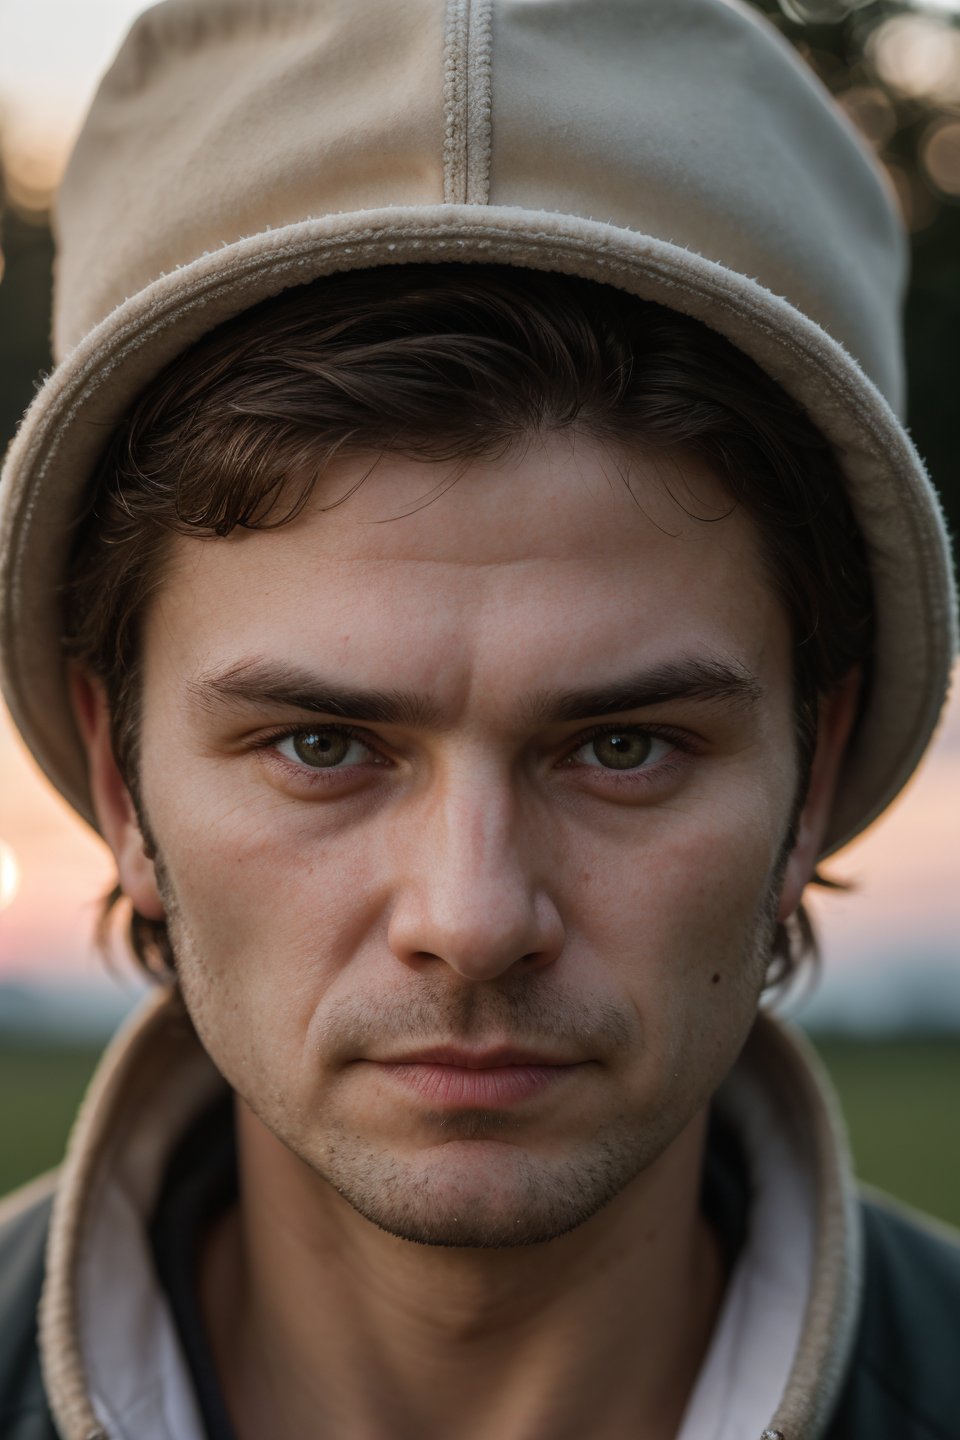 photograph, portrait, close up of a Oleg, at Twilight, shallow depth of field, Sony A7, L USM, photo, close-up